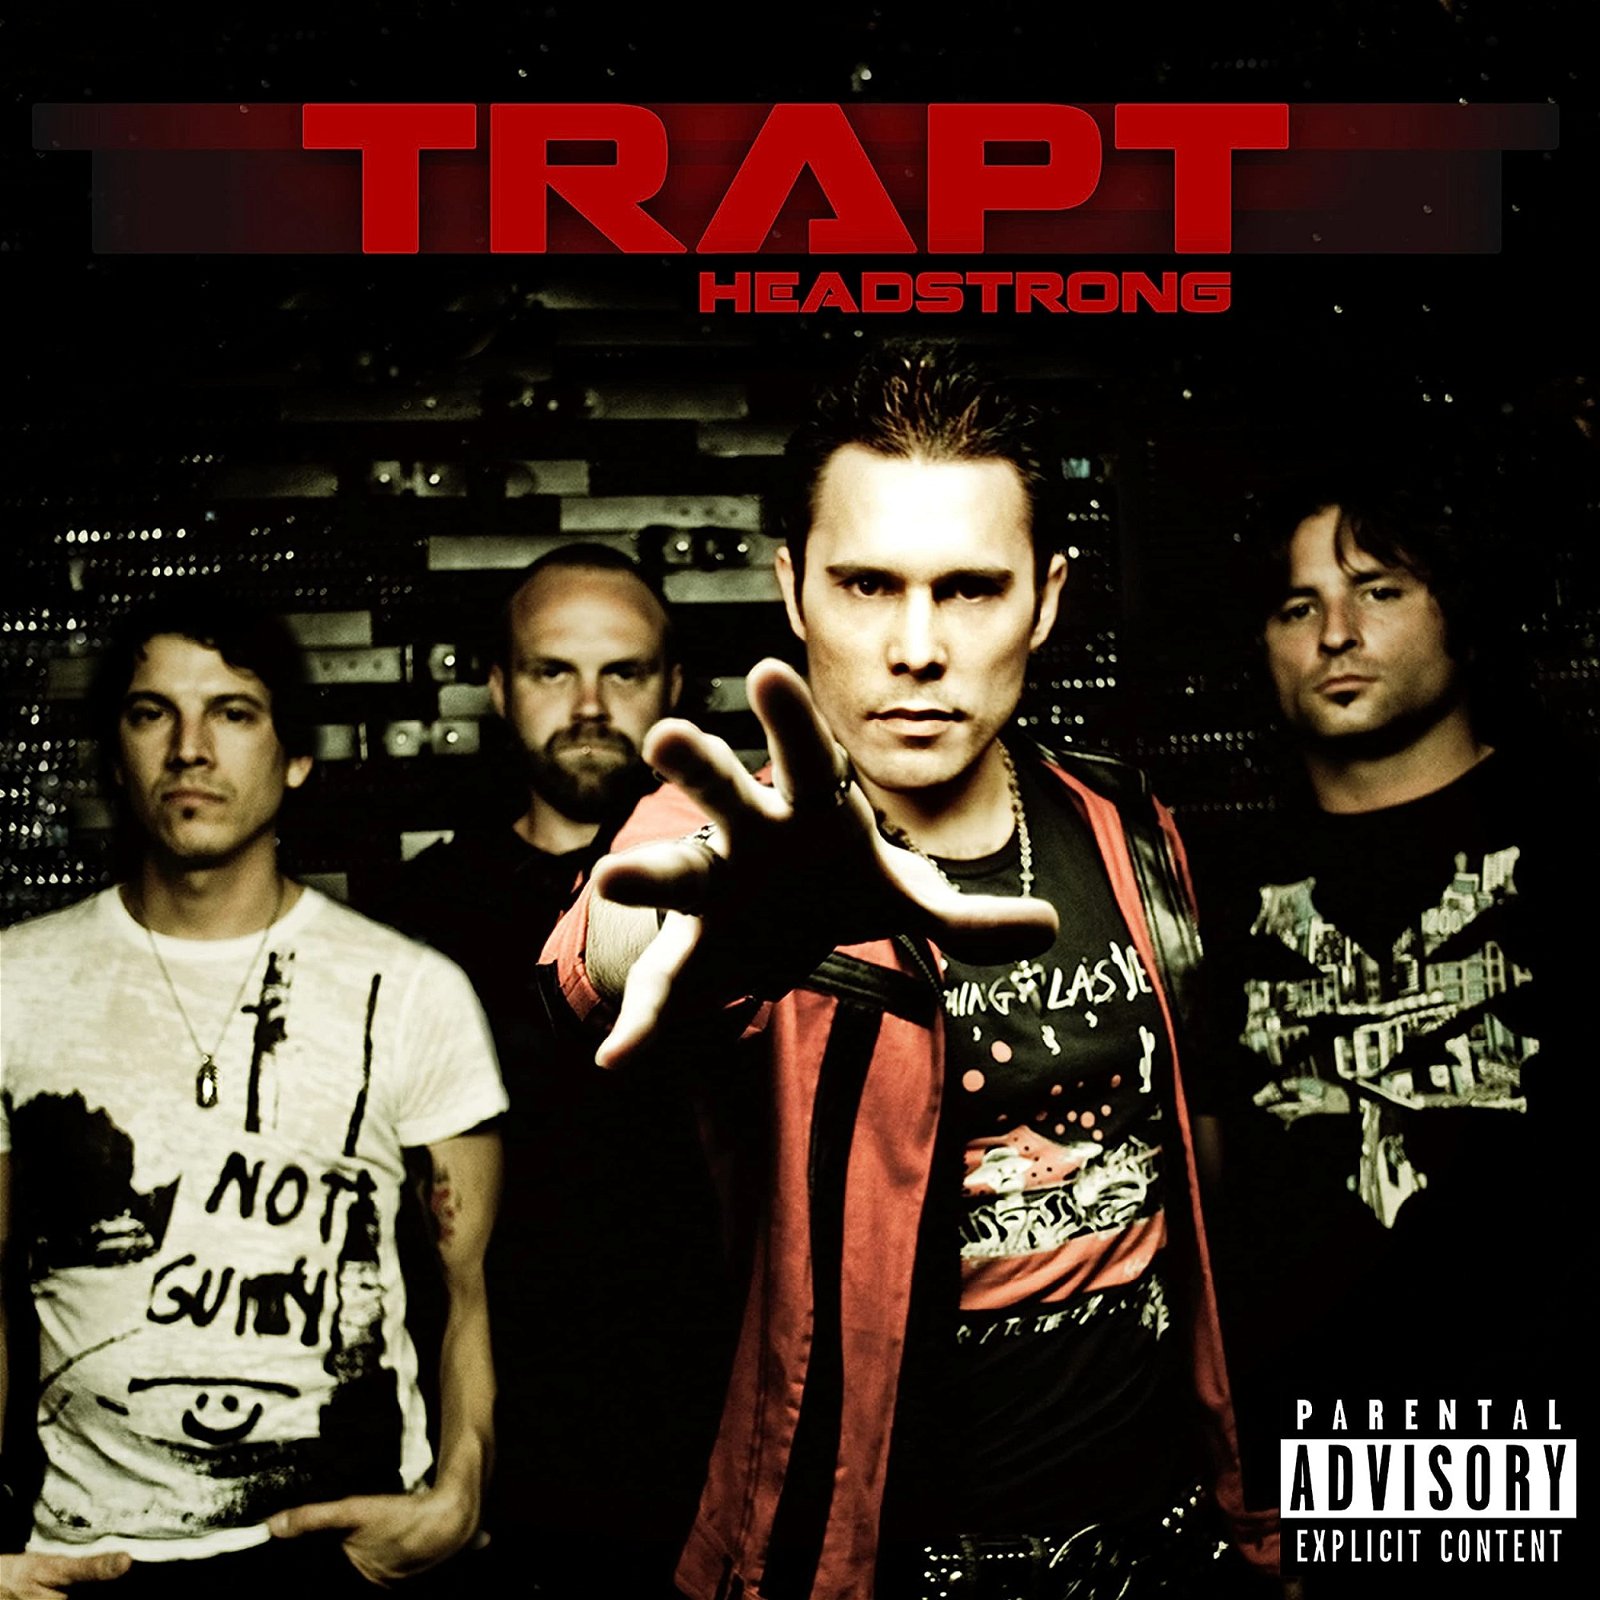 CD Shop - TRAPT HEADSTRONG